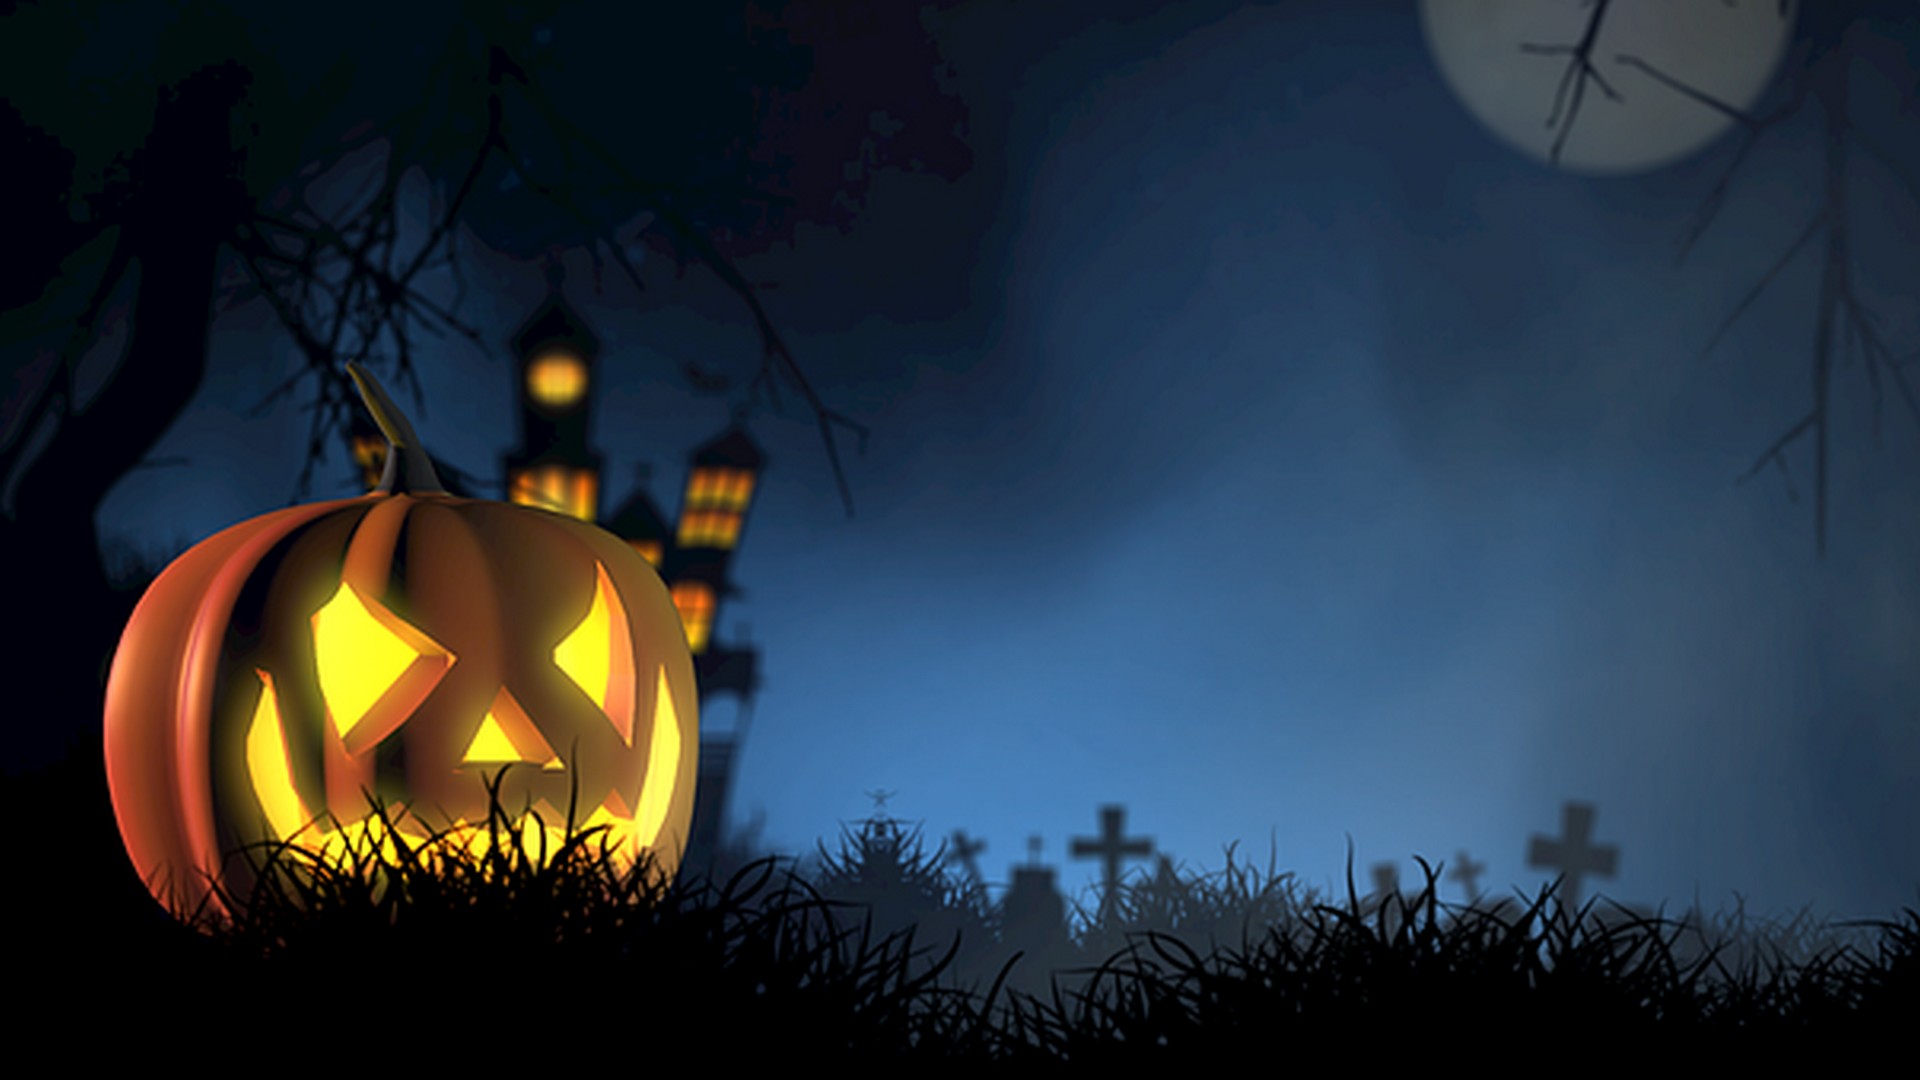 Halloween Aesthetic Wallpaper For Desktop With high-resolution 1920X1080 pixel. You can use this wallpaper for your Windows and Mac OS computers as well as your Android and iPhone smartphones